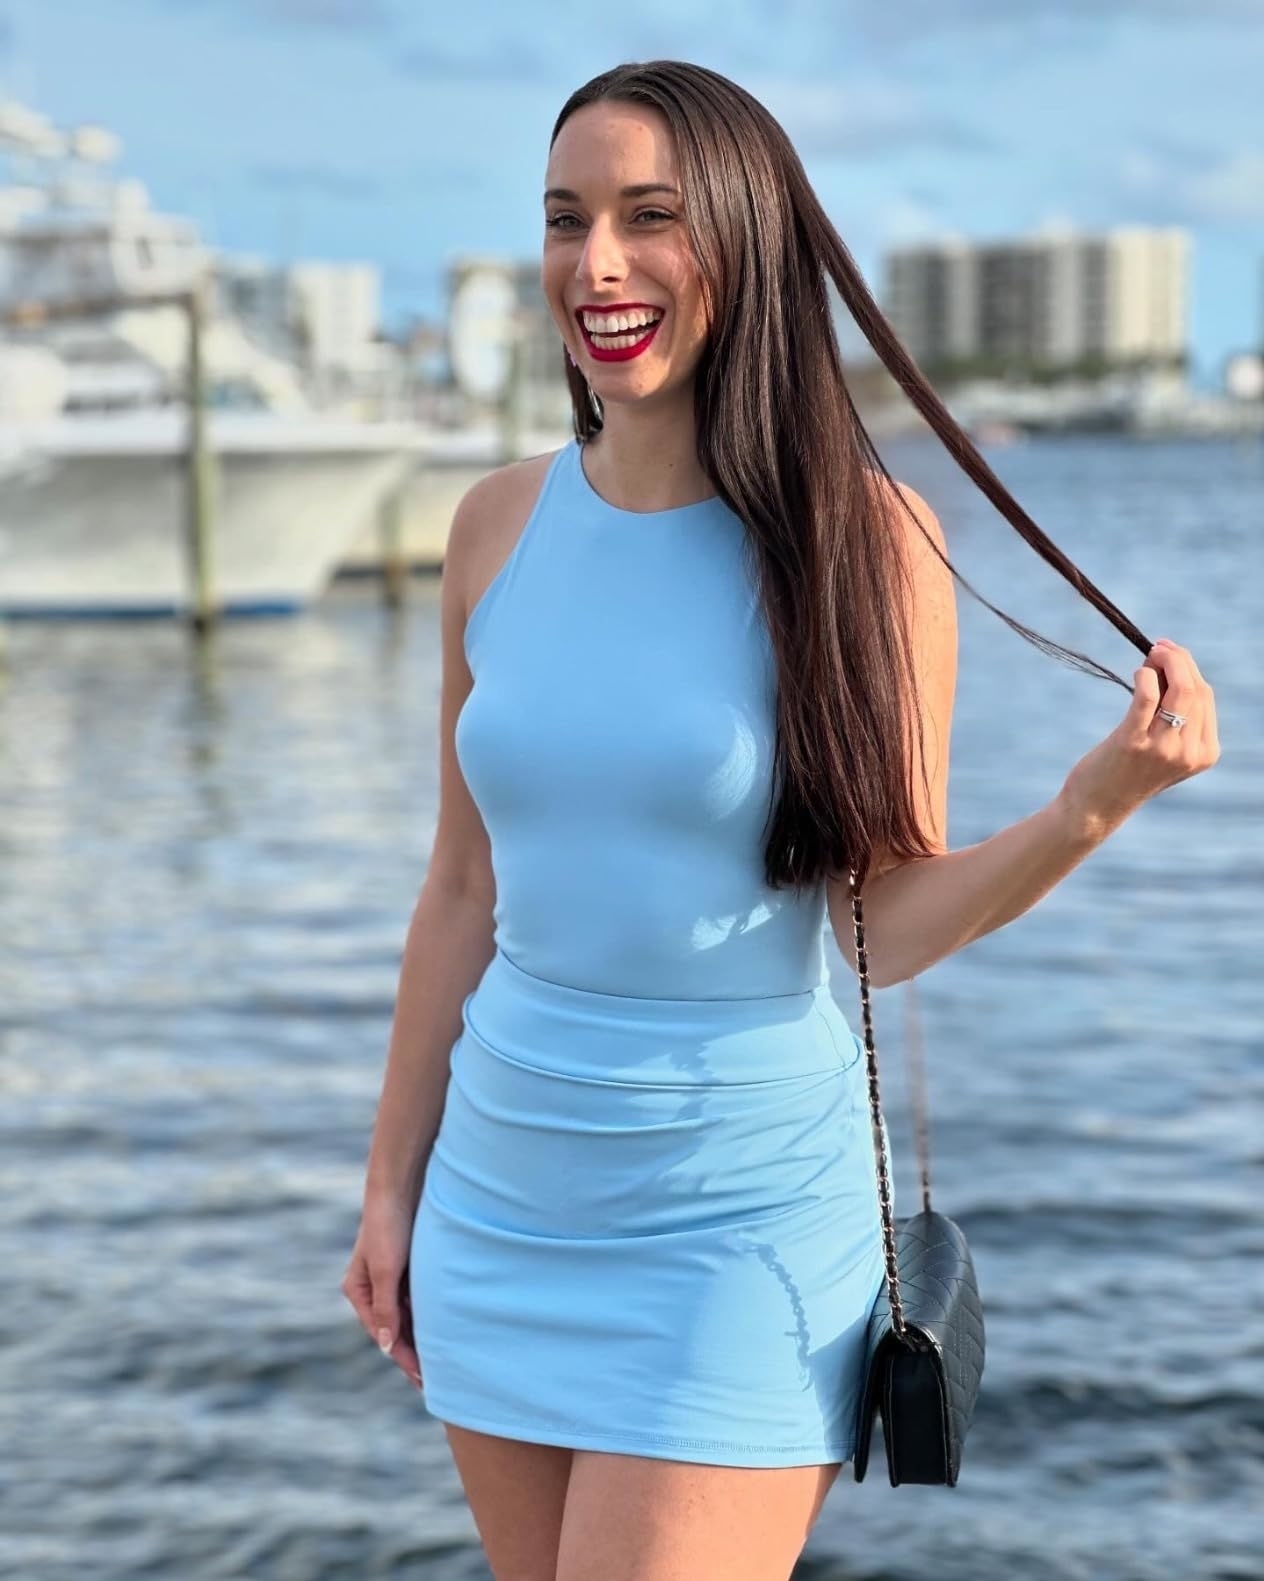 Reviewer with long hair smiles in a sleeveless top and mini skirt by the waterfront, holding a small black purse